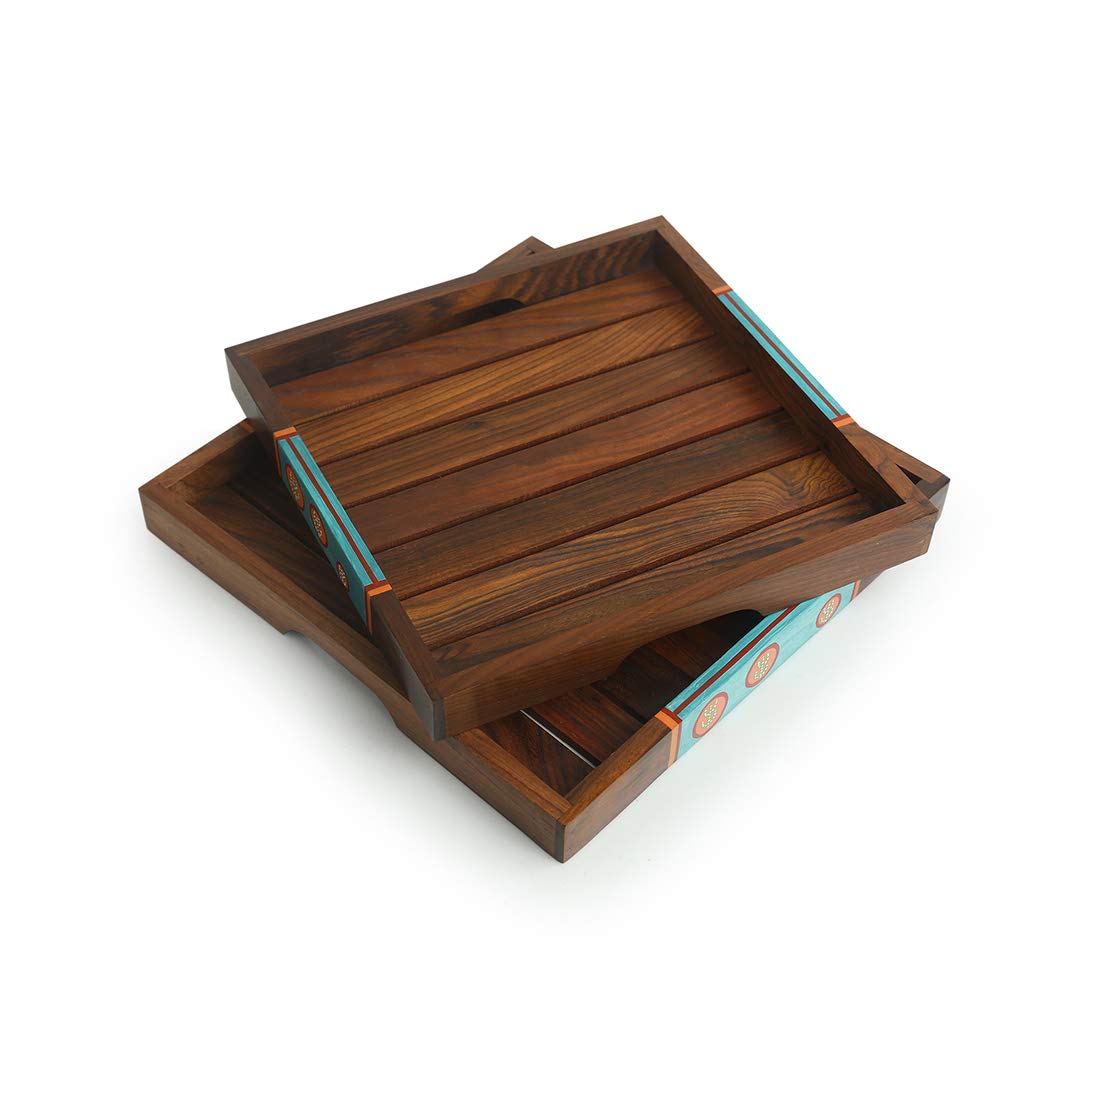 Handcrafted & Handpainted Wooden Nested Serving Tray | Set of 2 Serving Trays for SNacks & Beverages